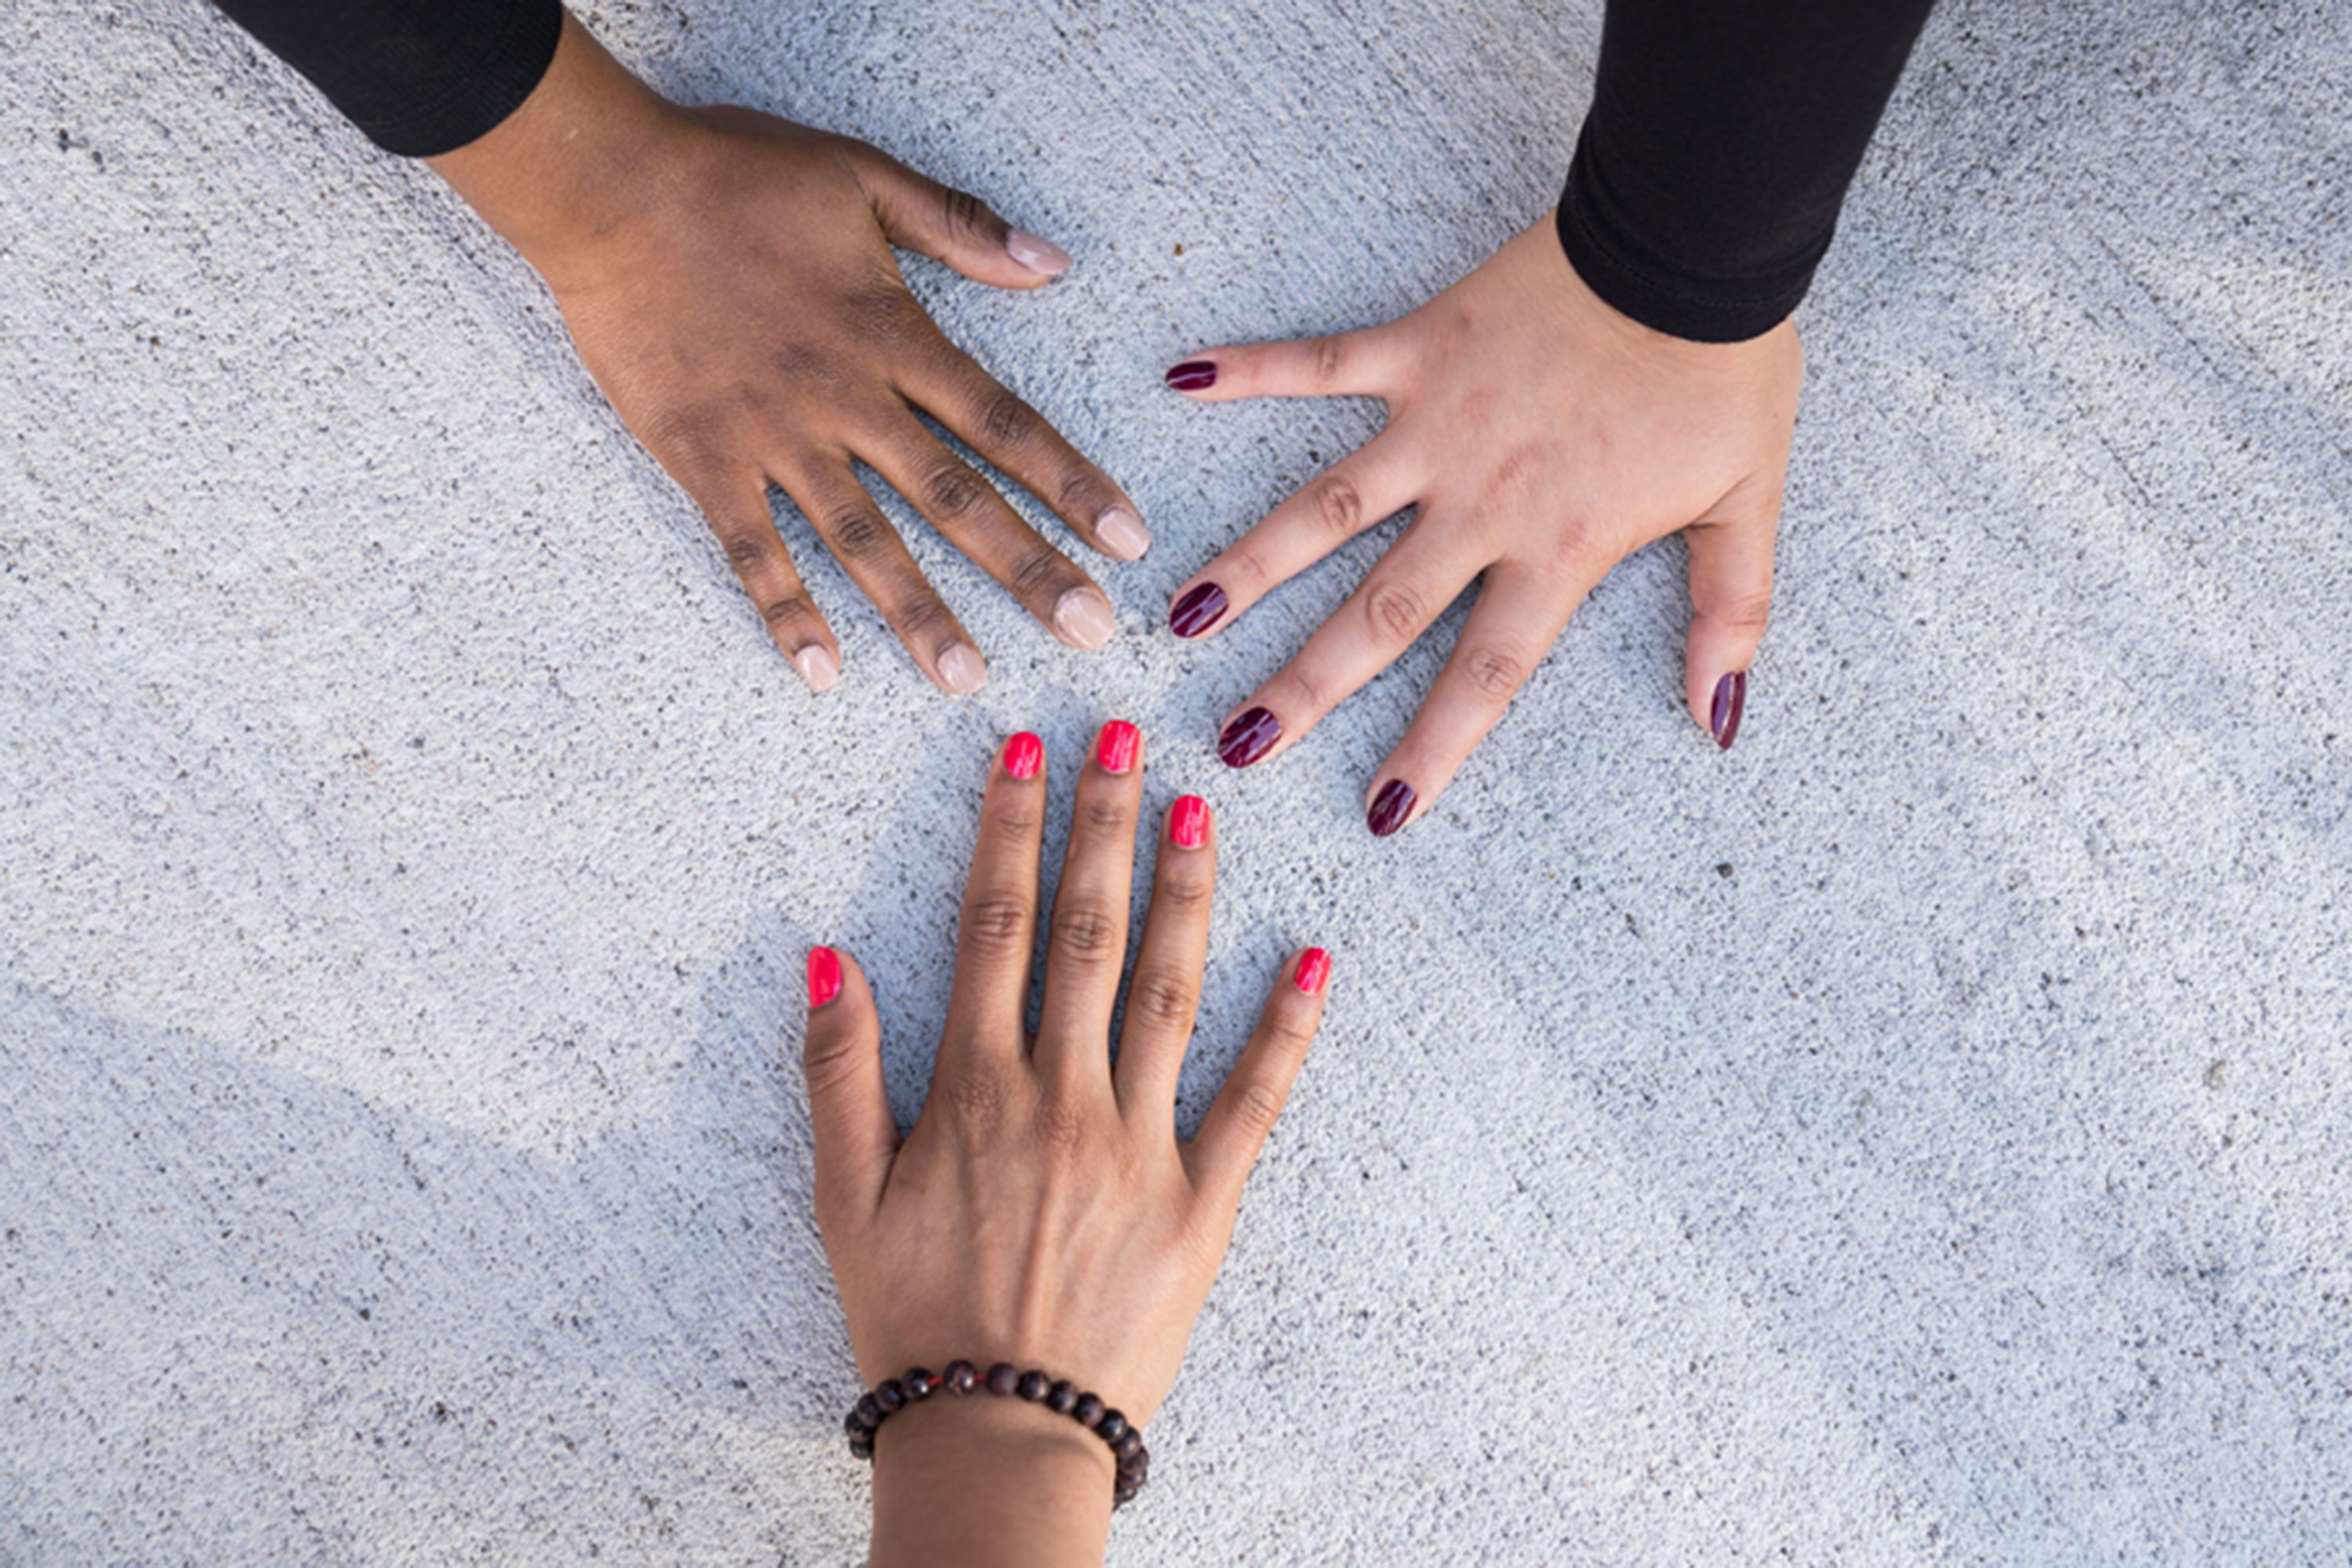 Orly has created a halal-friendly nail polish collection